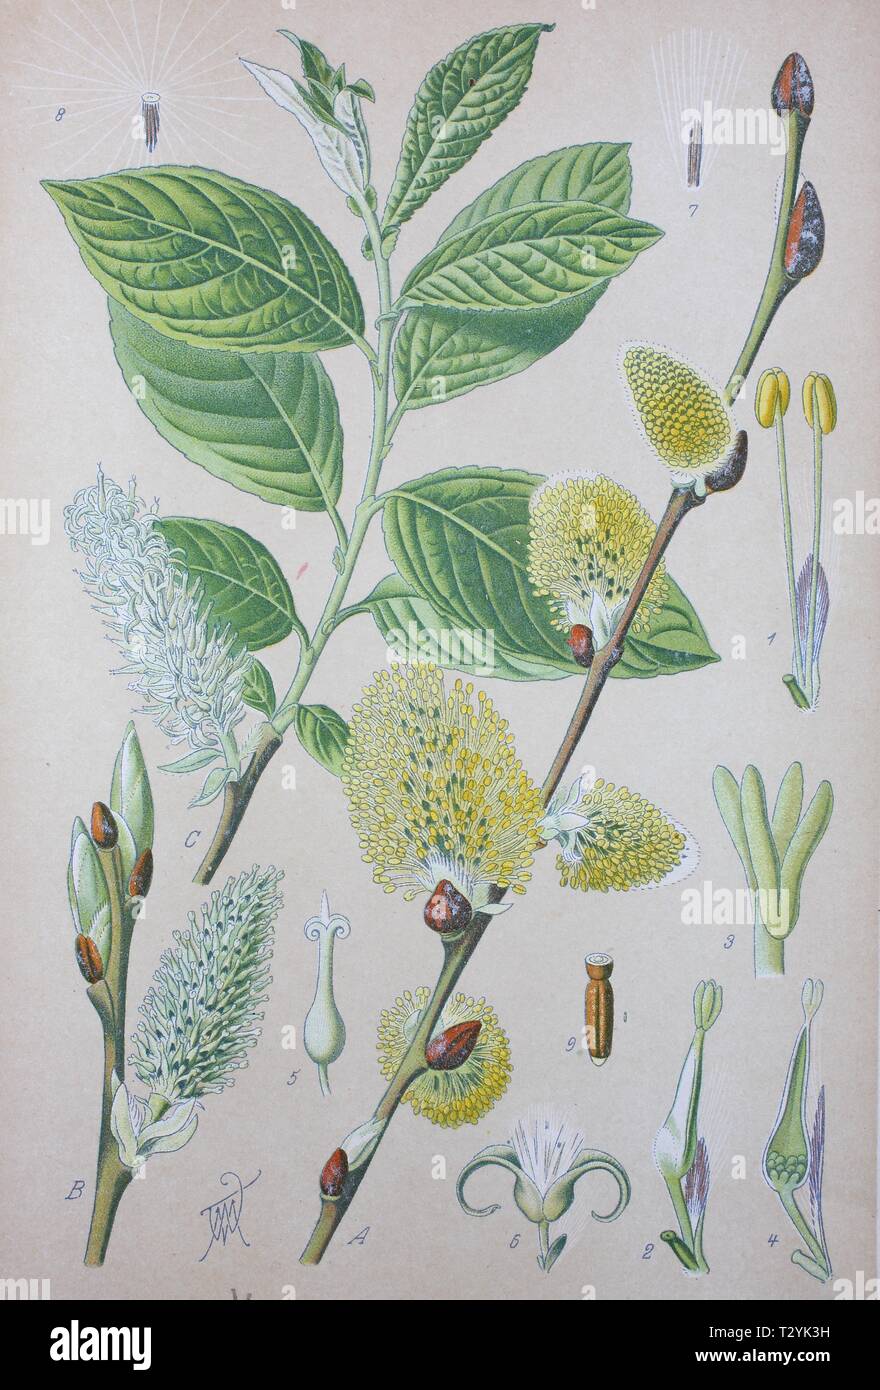 Goat willow (Salix caprea), historical illustration from 1885, Germany Stock Photo